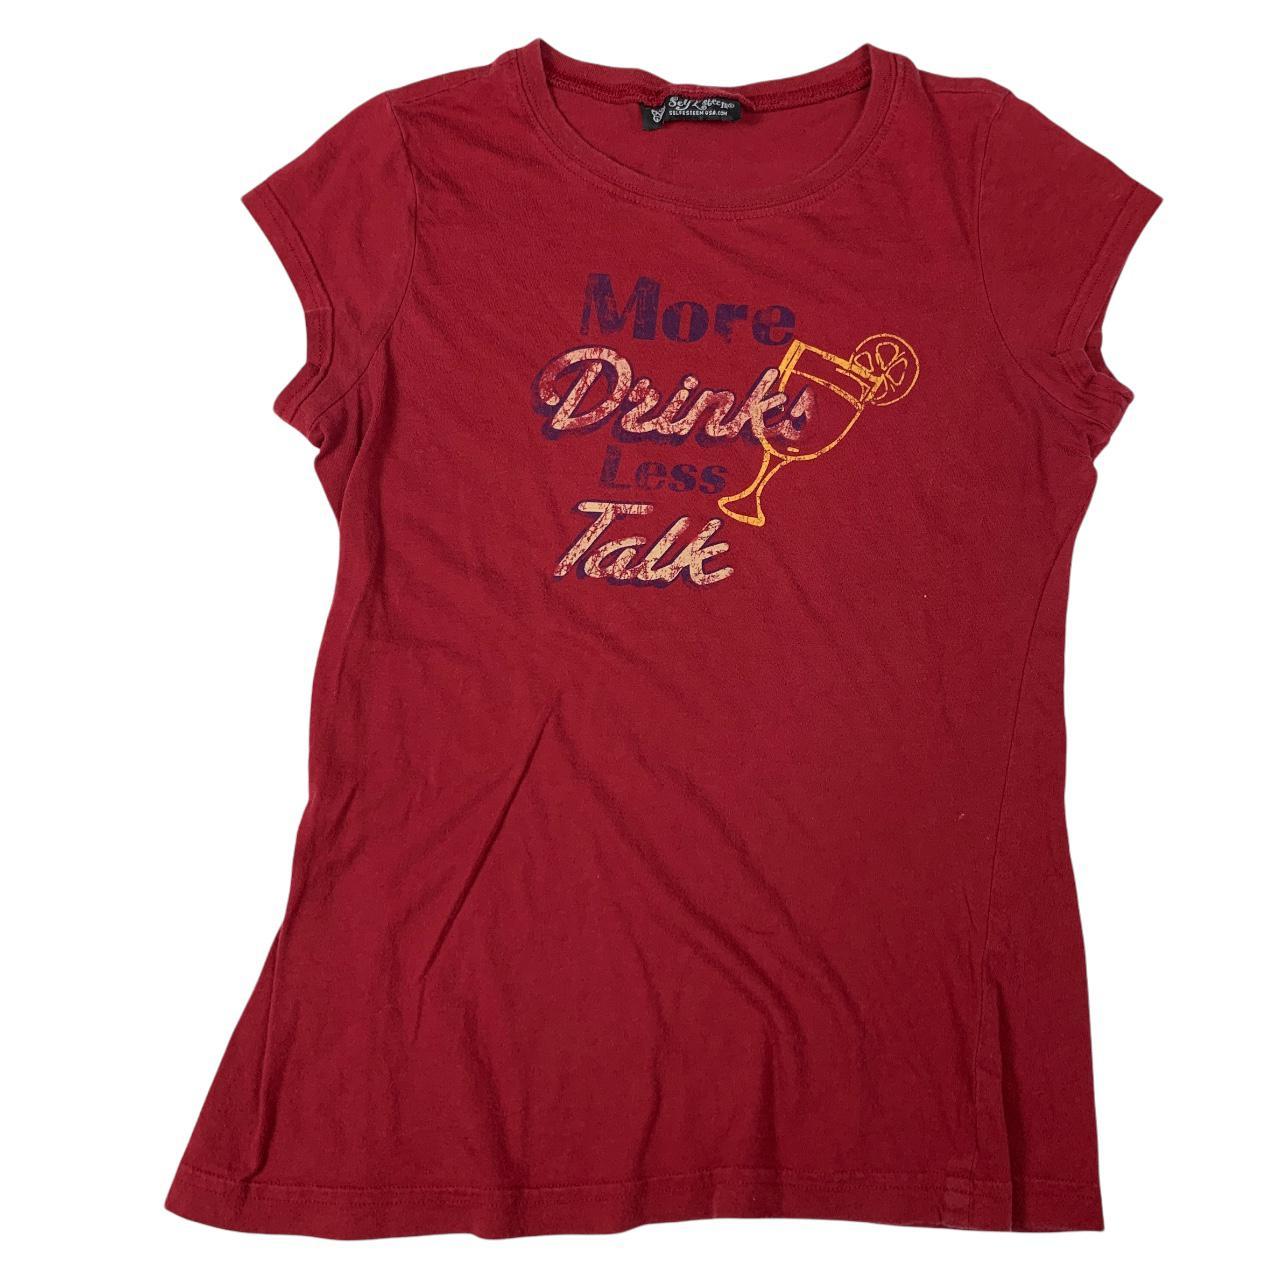 Product Image 1 - MORE DRINK LESS TALK TEE

This